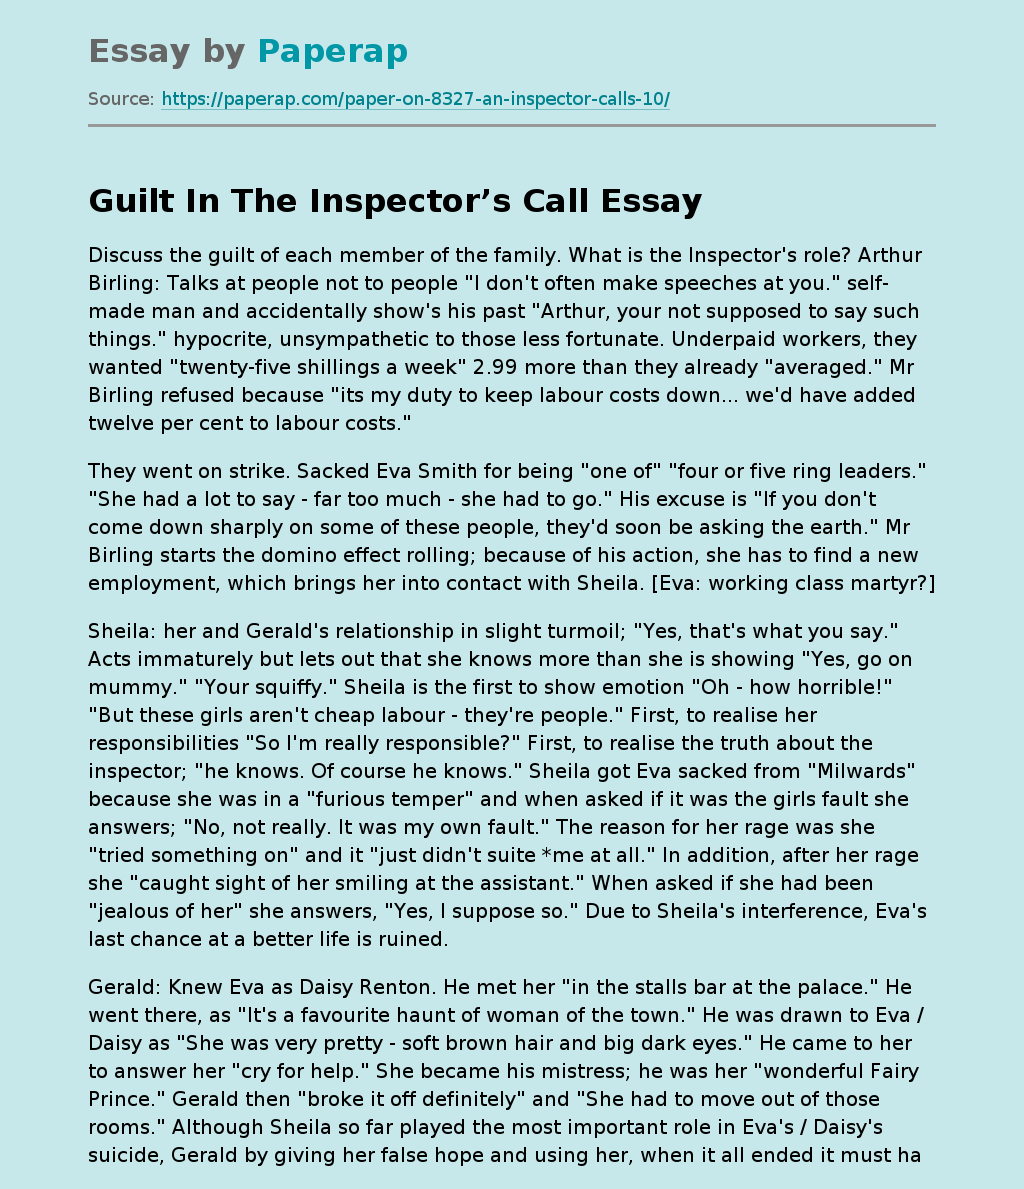 Guilt In The Inspector’s Call